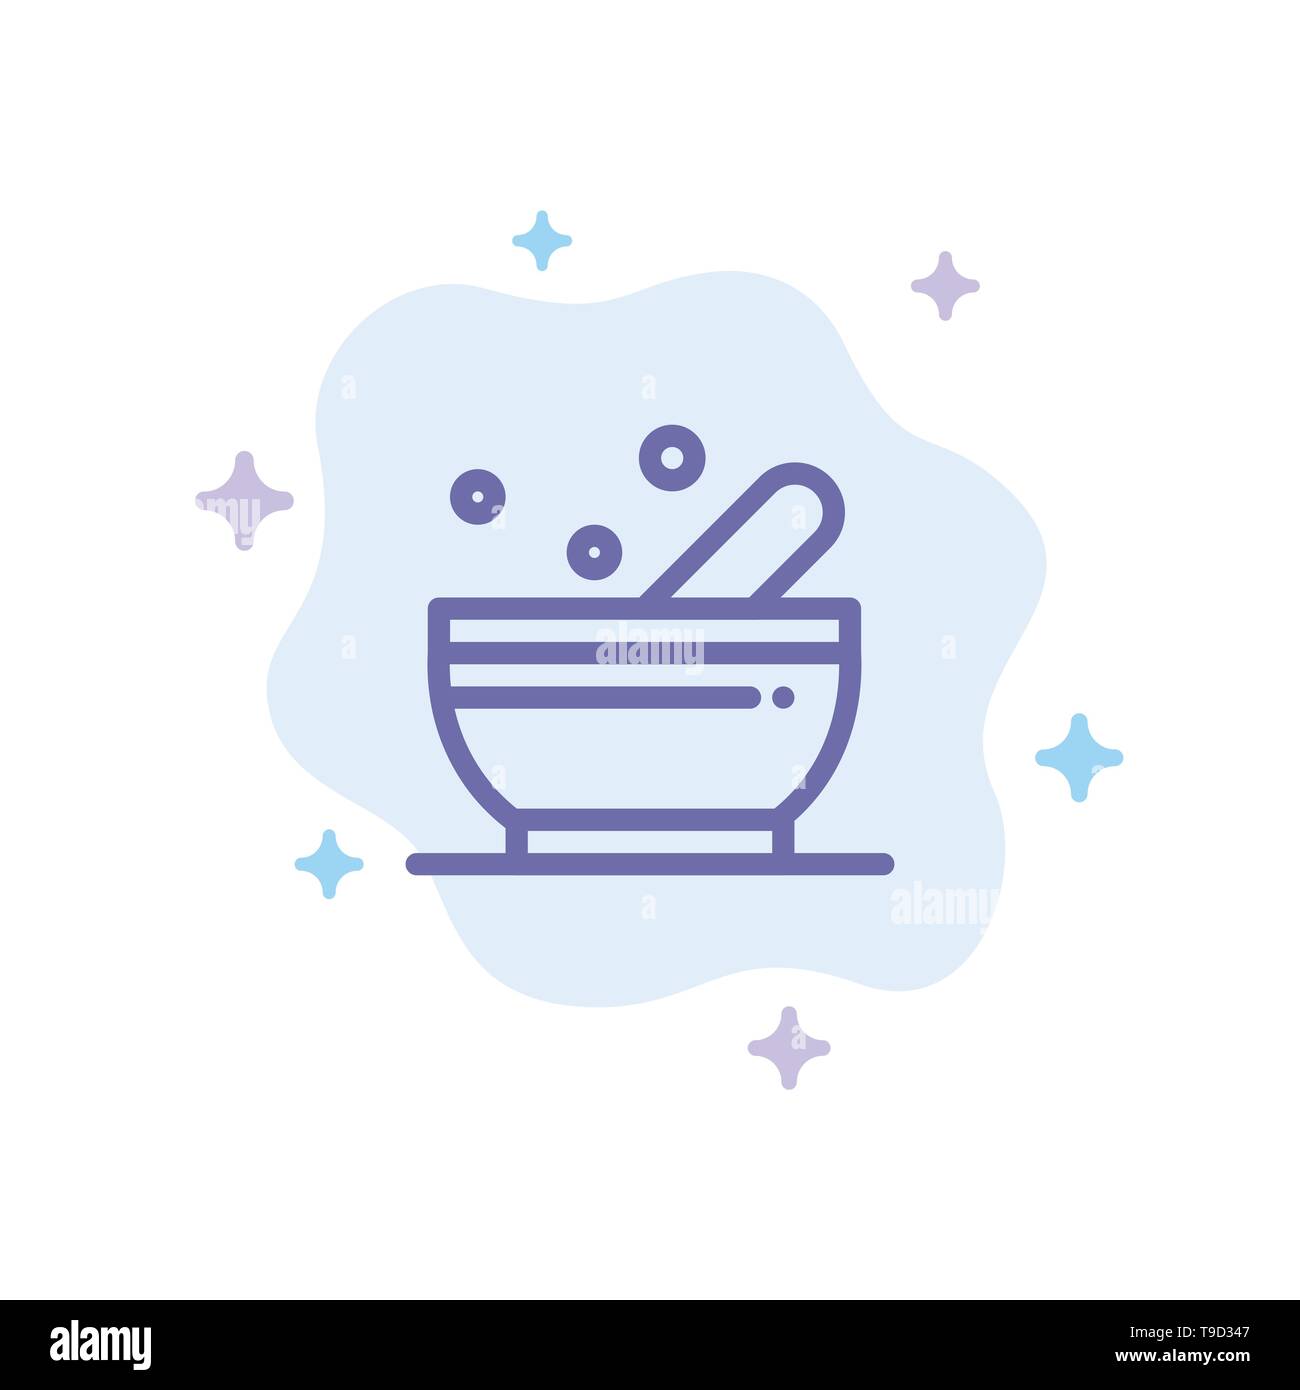 Bowl, Soup, Science Blue Icon on Abstract Cloud Background Stock Vector